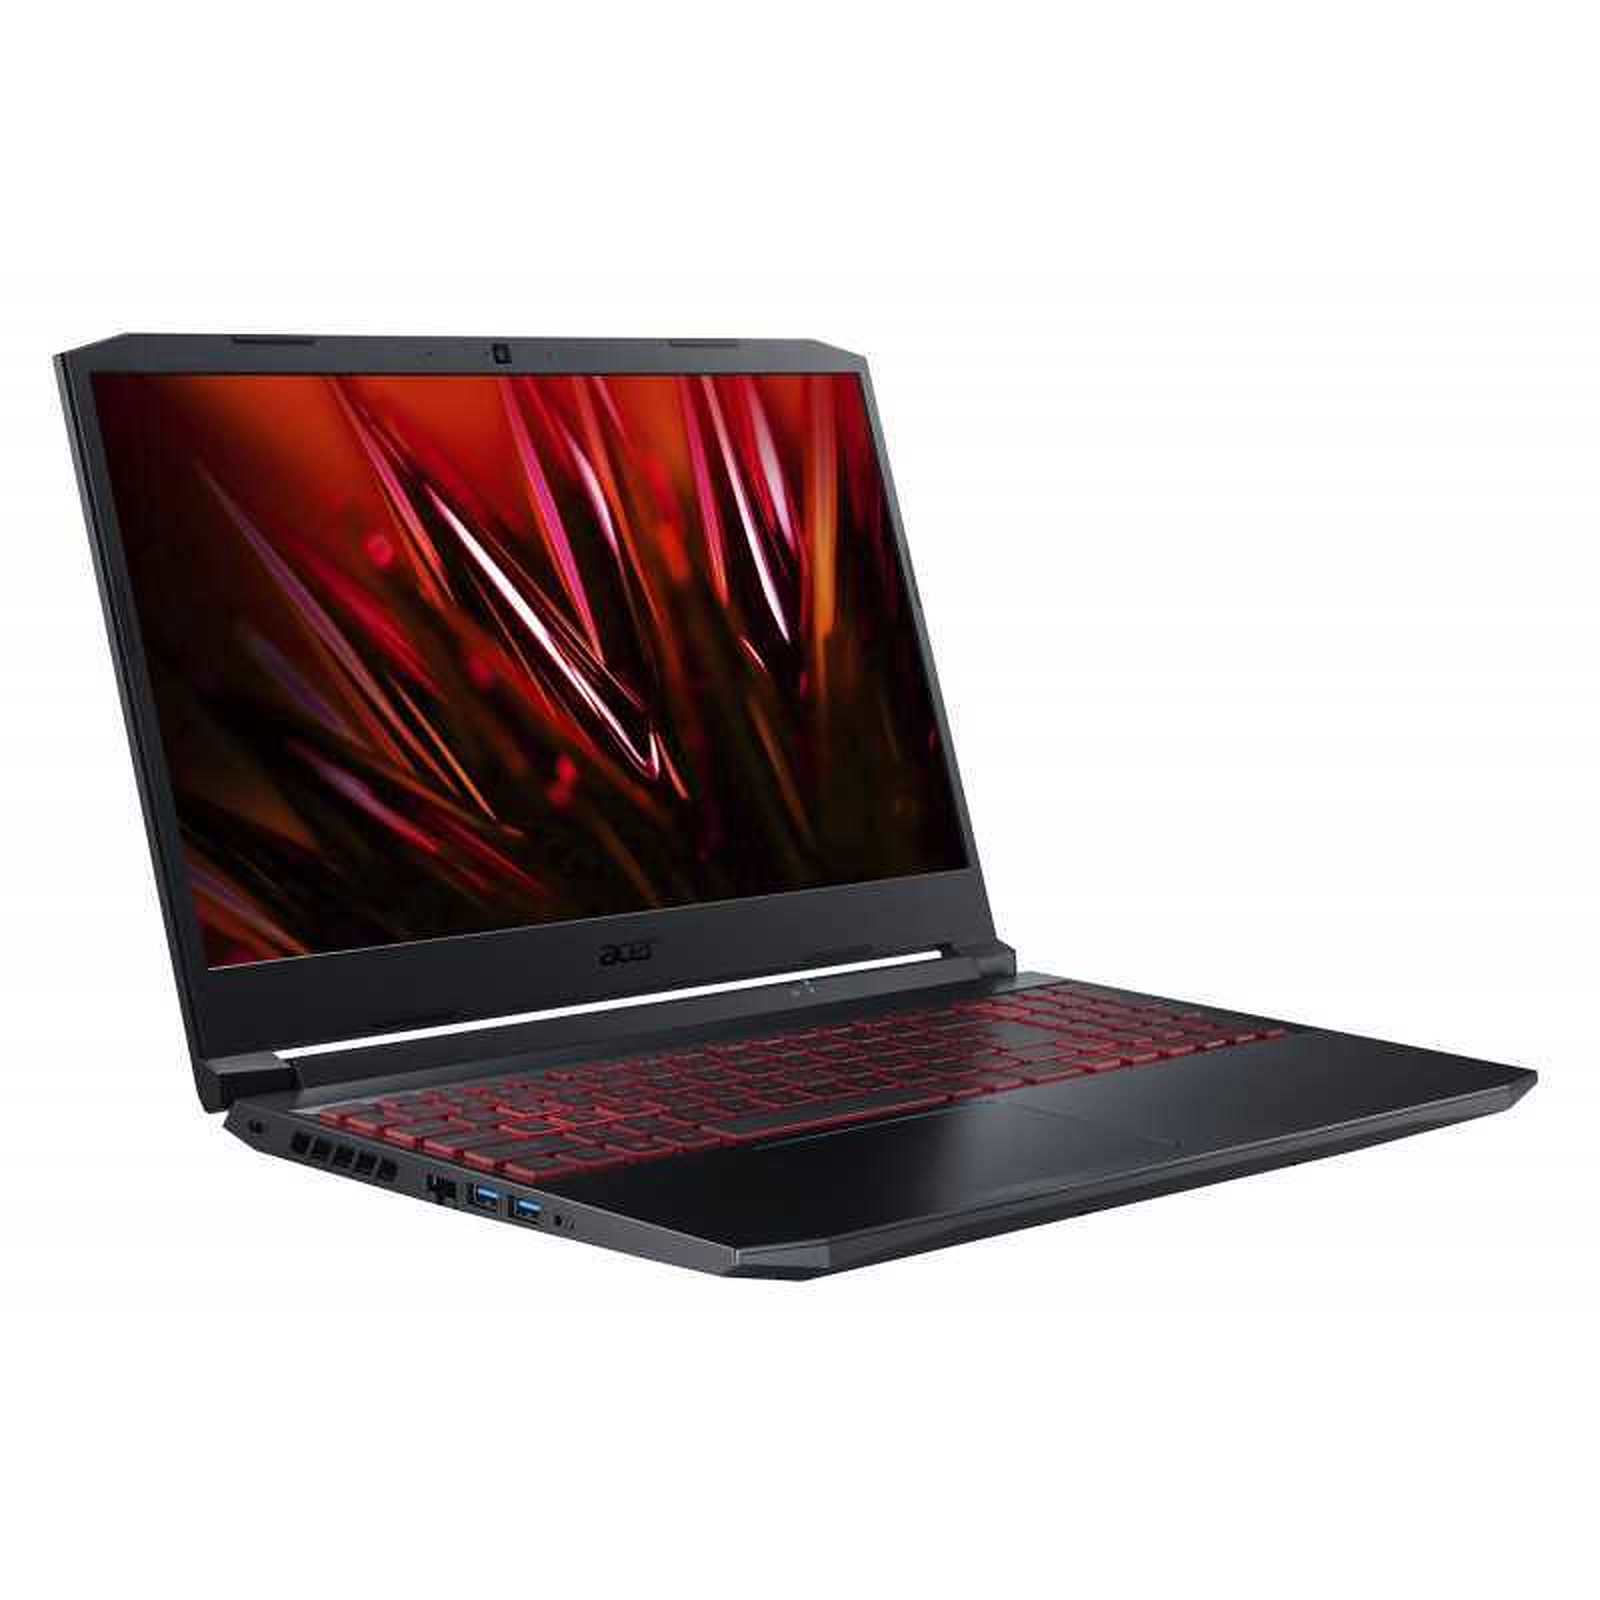 Acer NH.QEKEF.001 - PC portable Acer - grosbill-pro.com - 2